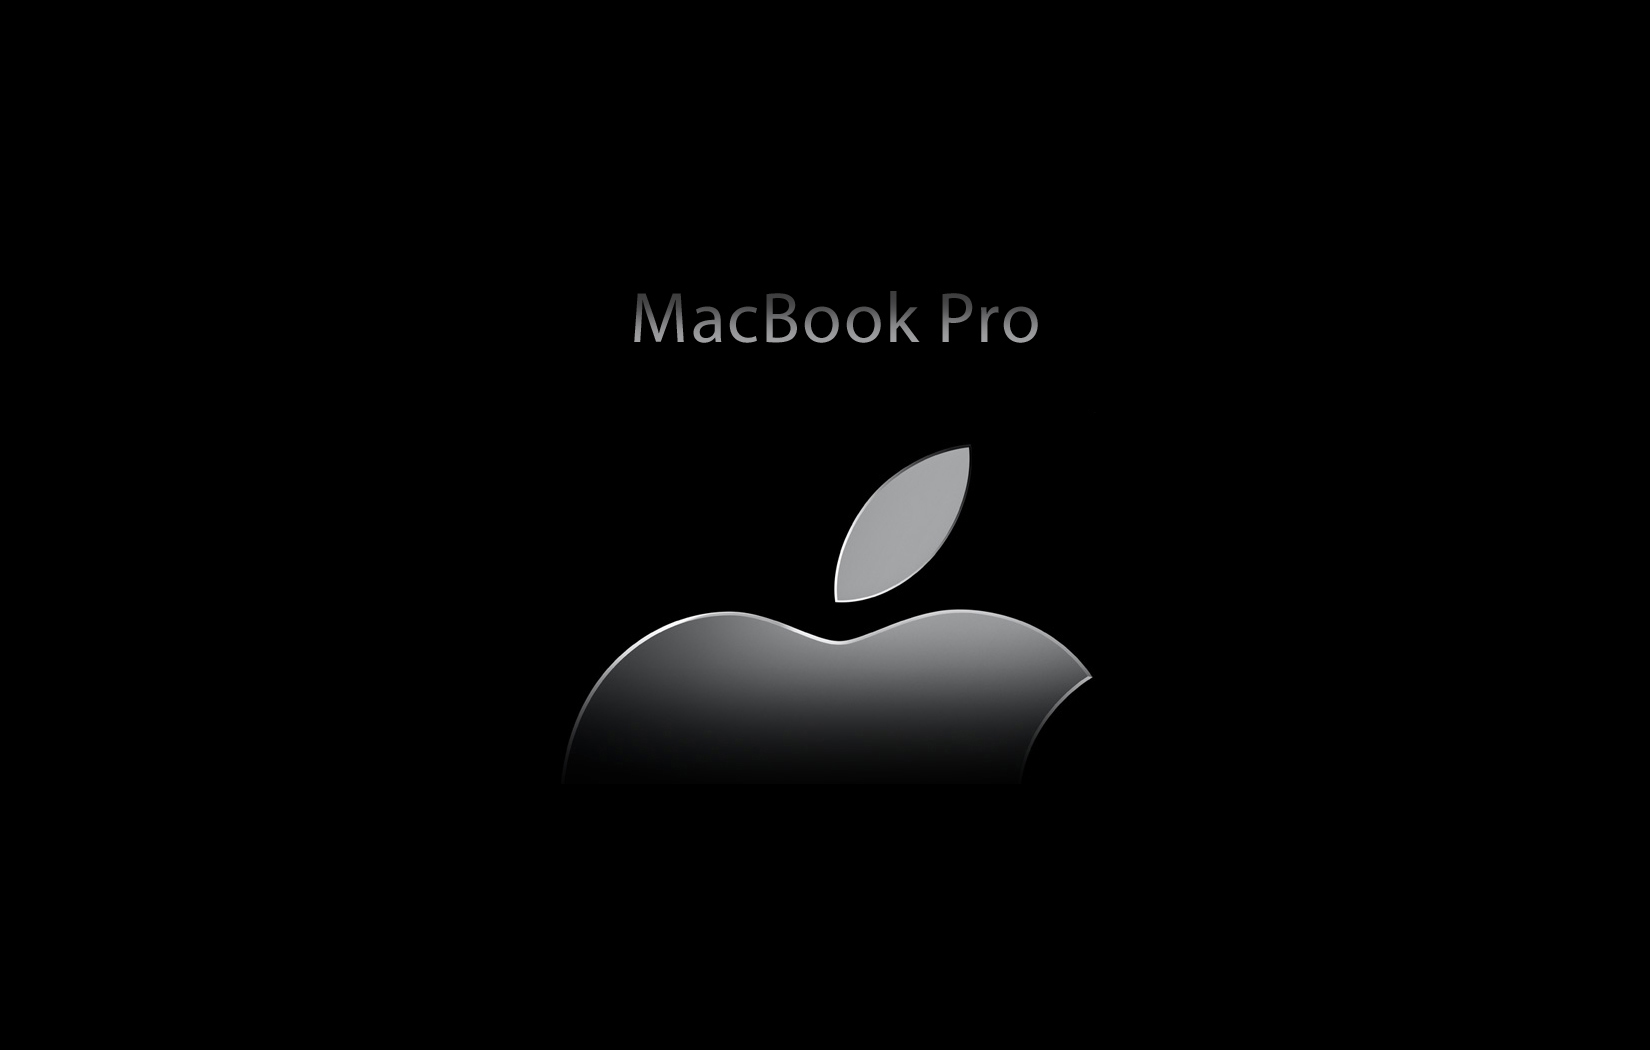 Wallpaper Pictures Macbook Pro And